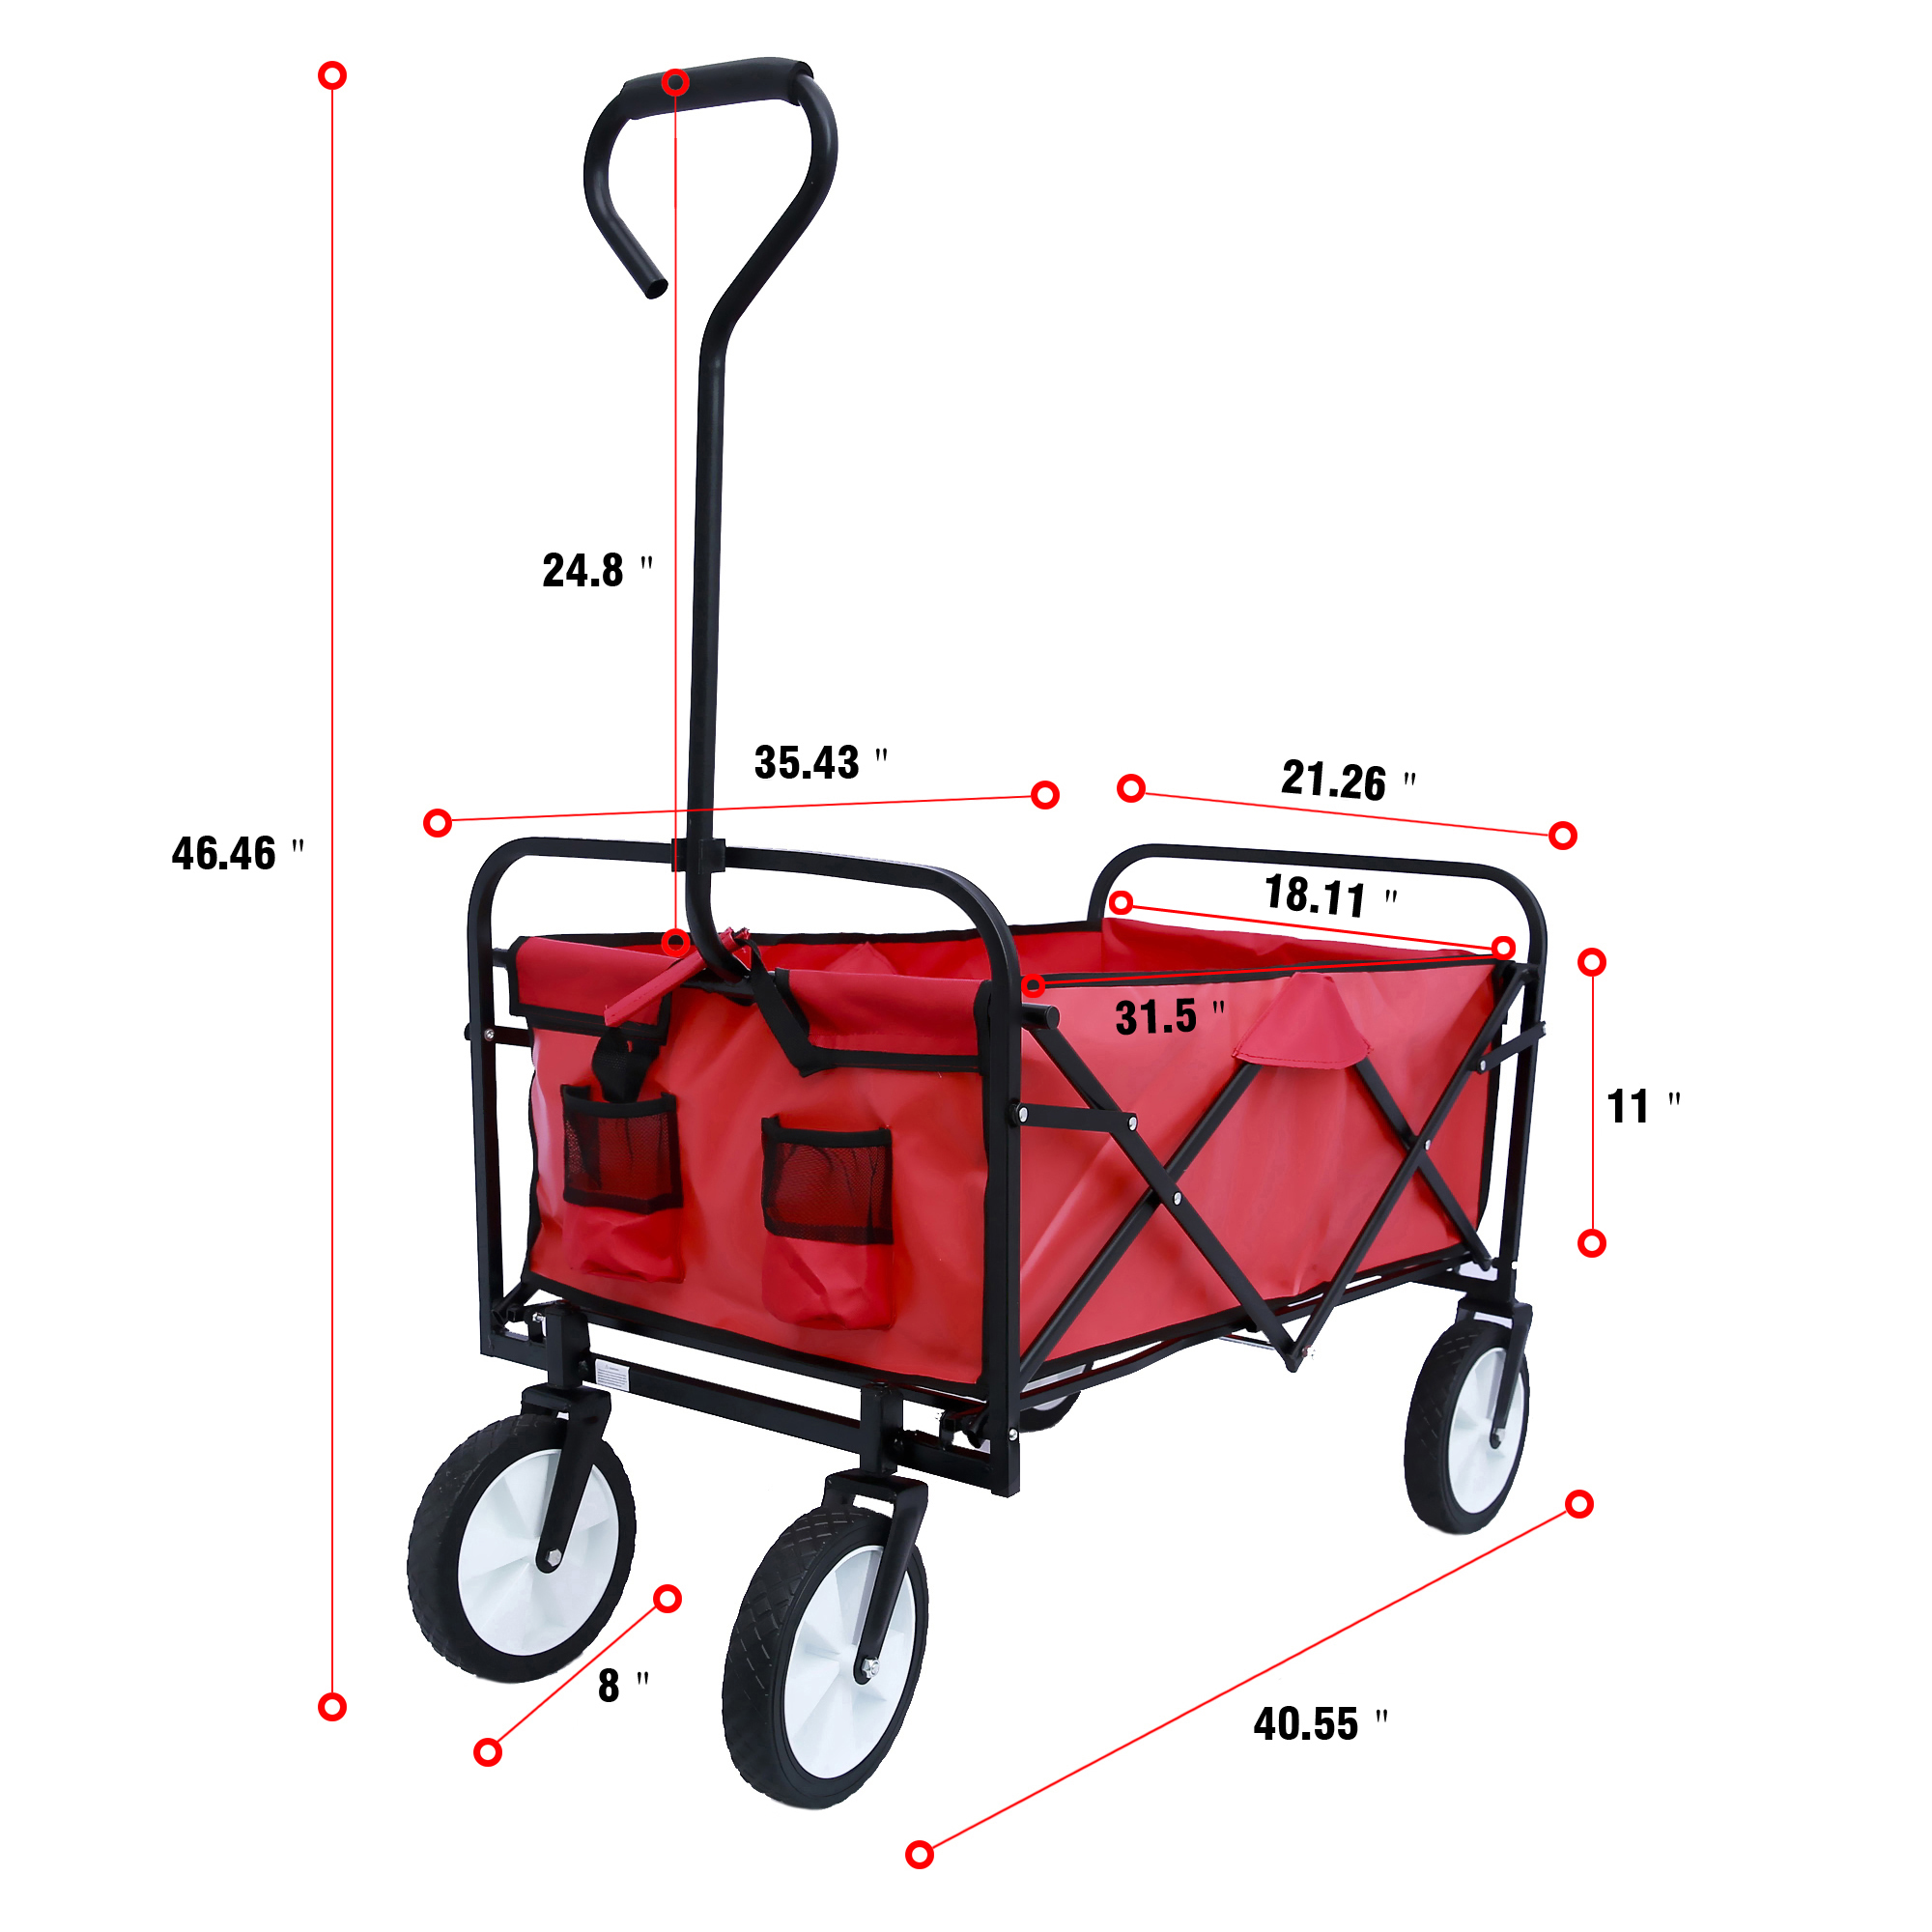 Beach Wagons with Big Wheels for Sand, Sturdy Steel Frame Collapsible Wagon, Foldable Wagon, Grocery Wagon with 2 Mesh Cup Holders, Adjustable Handle for Garden Shopping Picnic Beach, Red, Q3809 - image 4 of 11